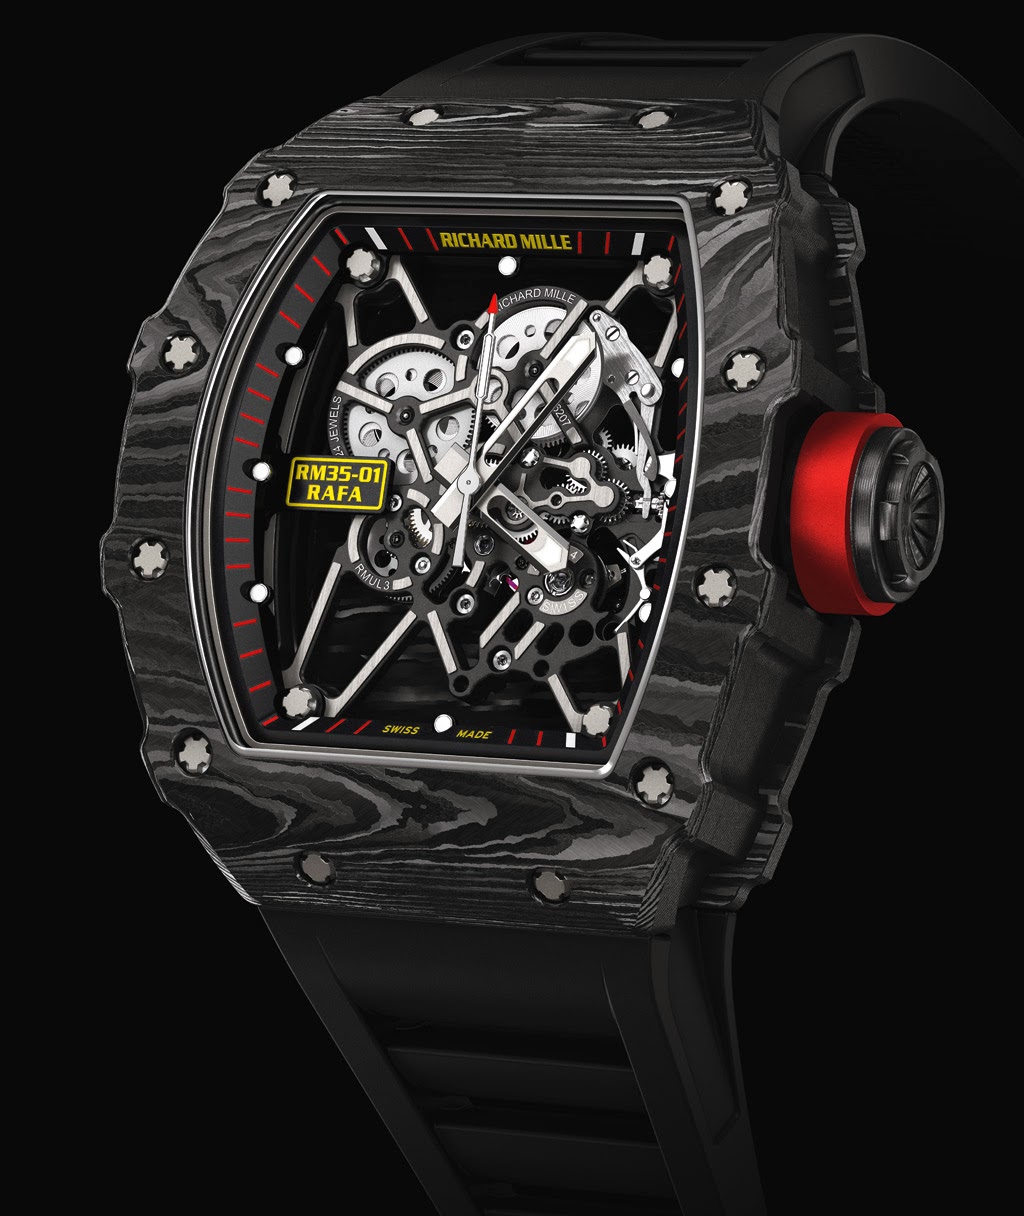 Richard Mille RM 35-01 Replica Watches